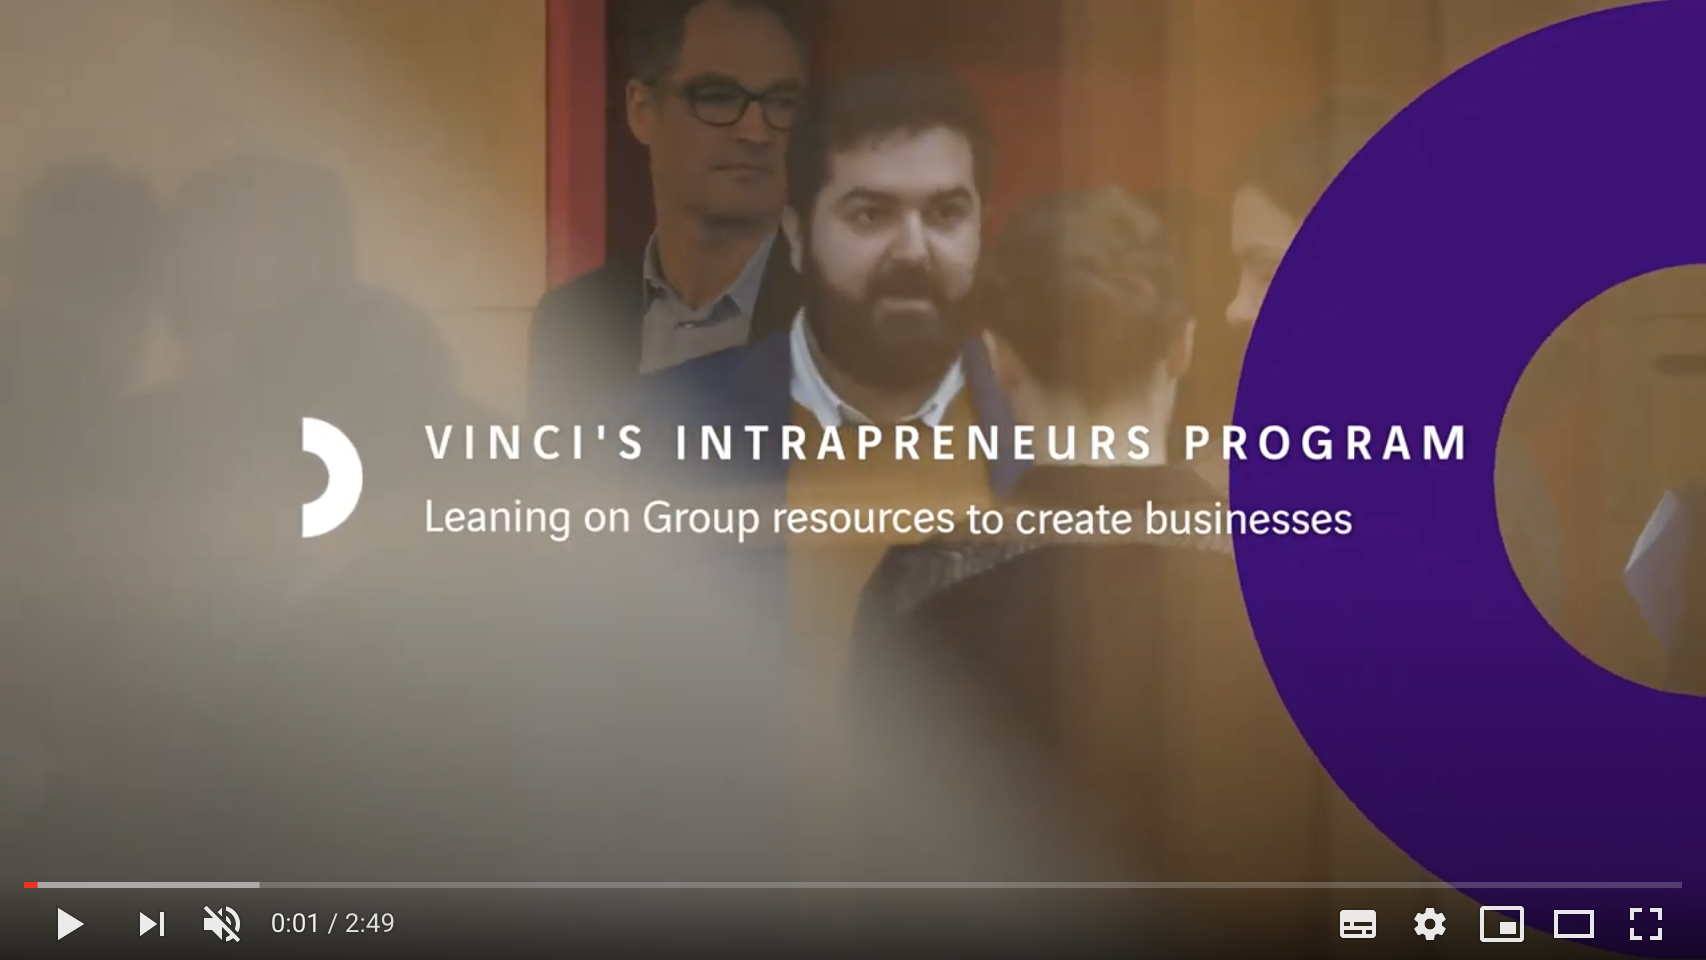 VINCI’s Intrapreneurs program: leaning on Group ressources to create businesses